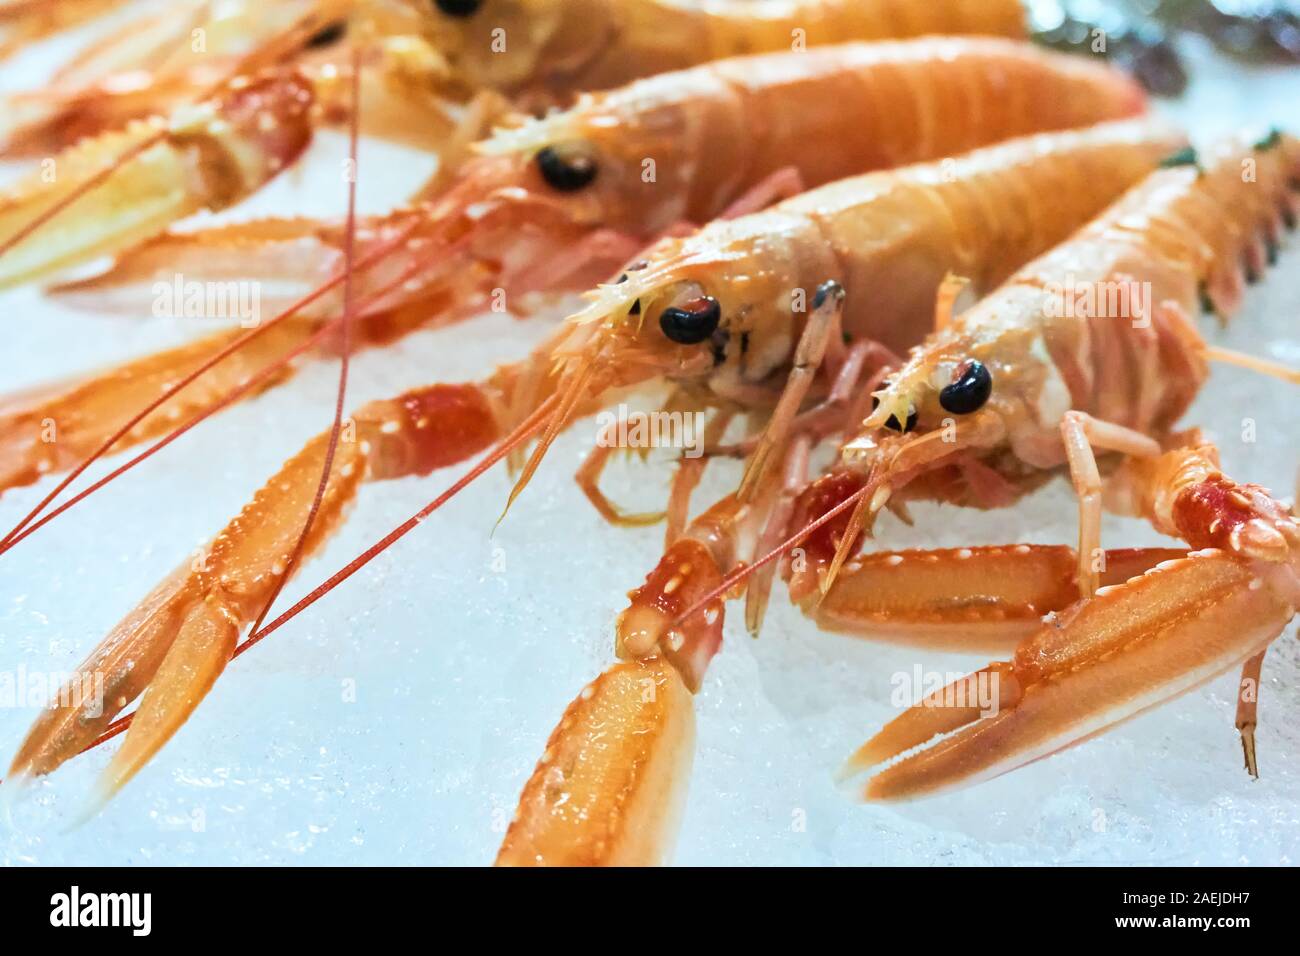 Close-up of Nephrops norvegicus also know as Norway lobster, Dublin Bay prawn, langoustine, langostino or scampi on ice. Stock Photo